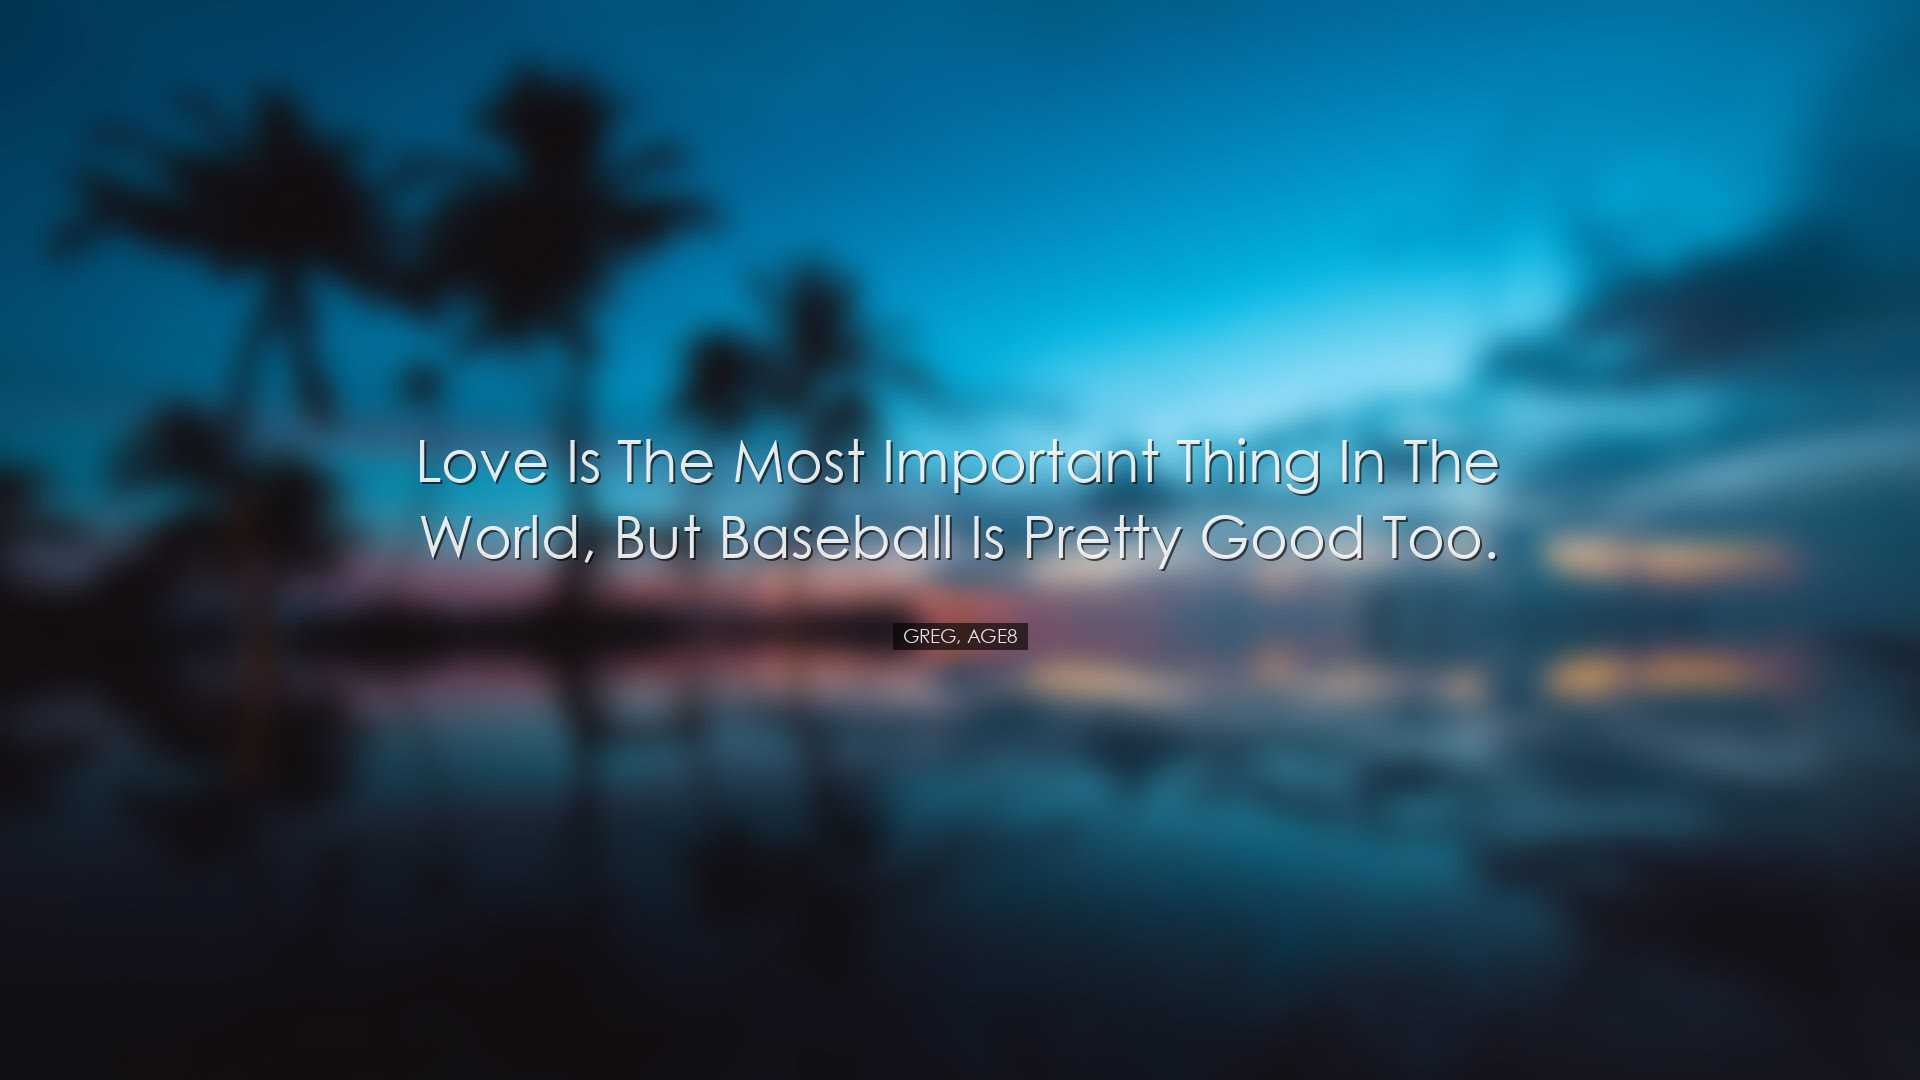 Love is the most important thing in the world, but baseball is pre